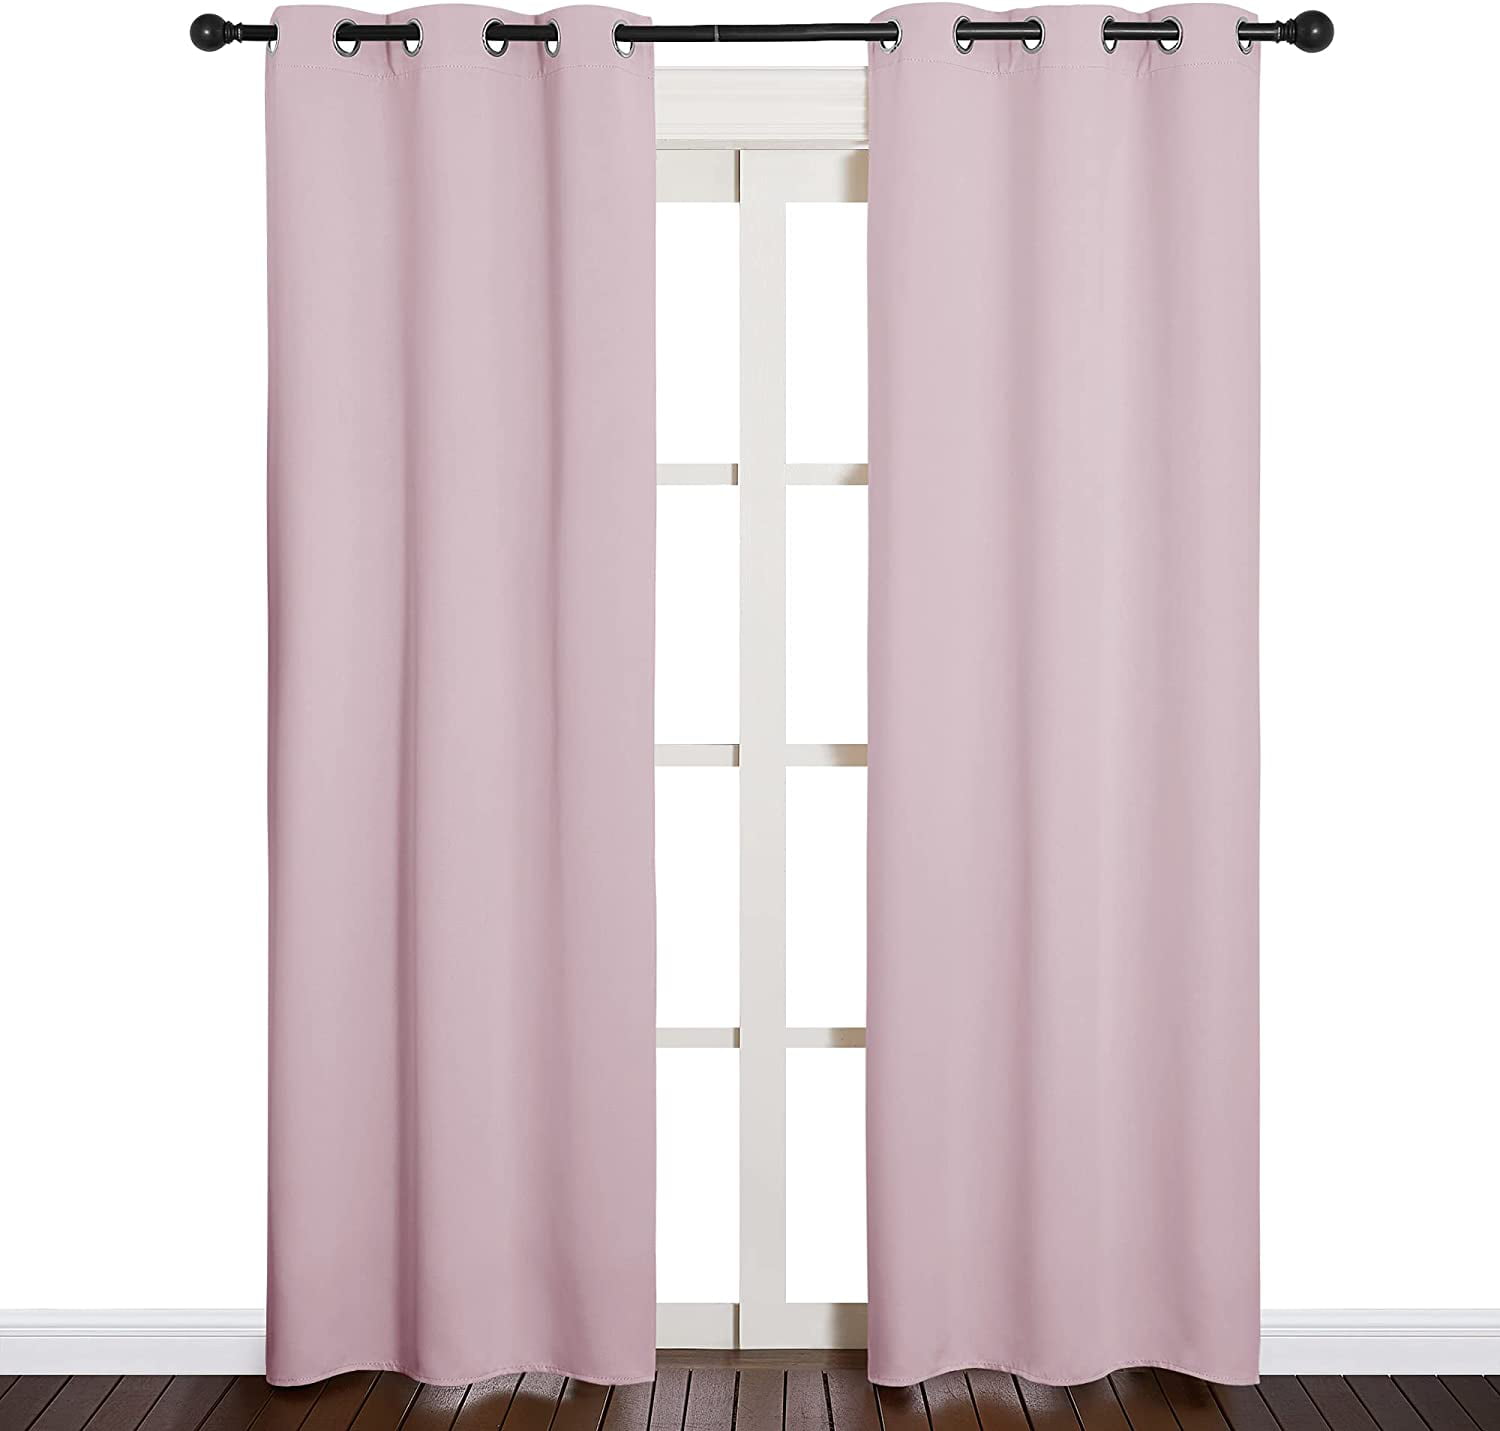 2 Panels, 52 by 84-Inch, Platinum & Greyish White NICETOWN Nursery Star Window Curtain Panels Room Darkening Blackout Drapes with Eyelets for Girls Room